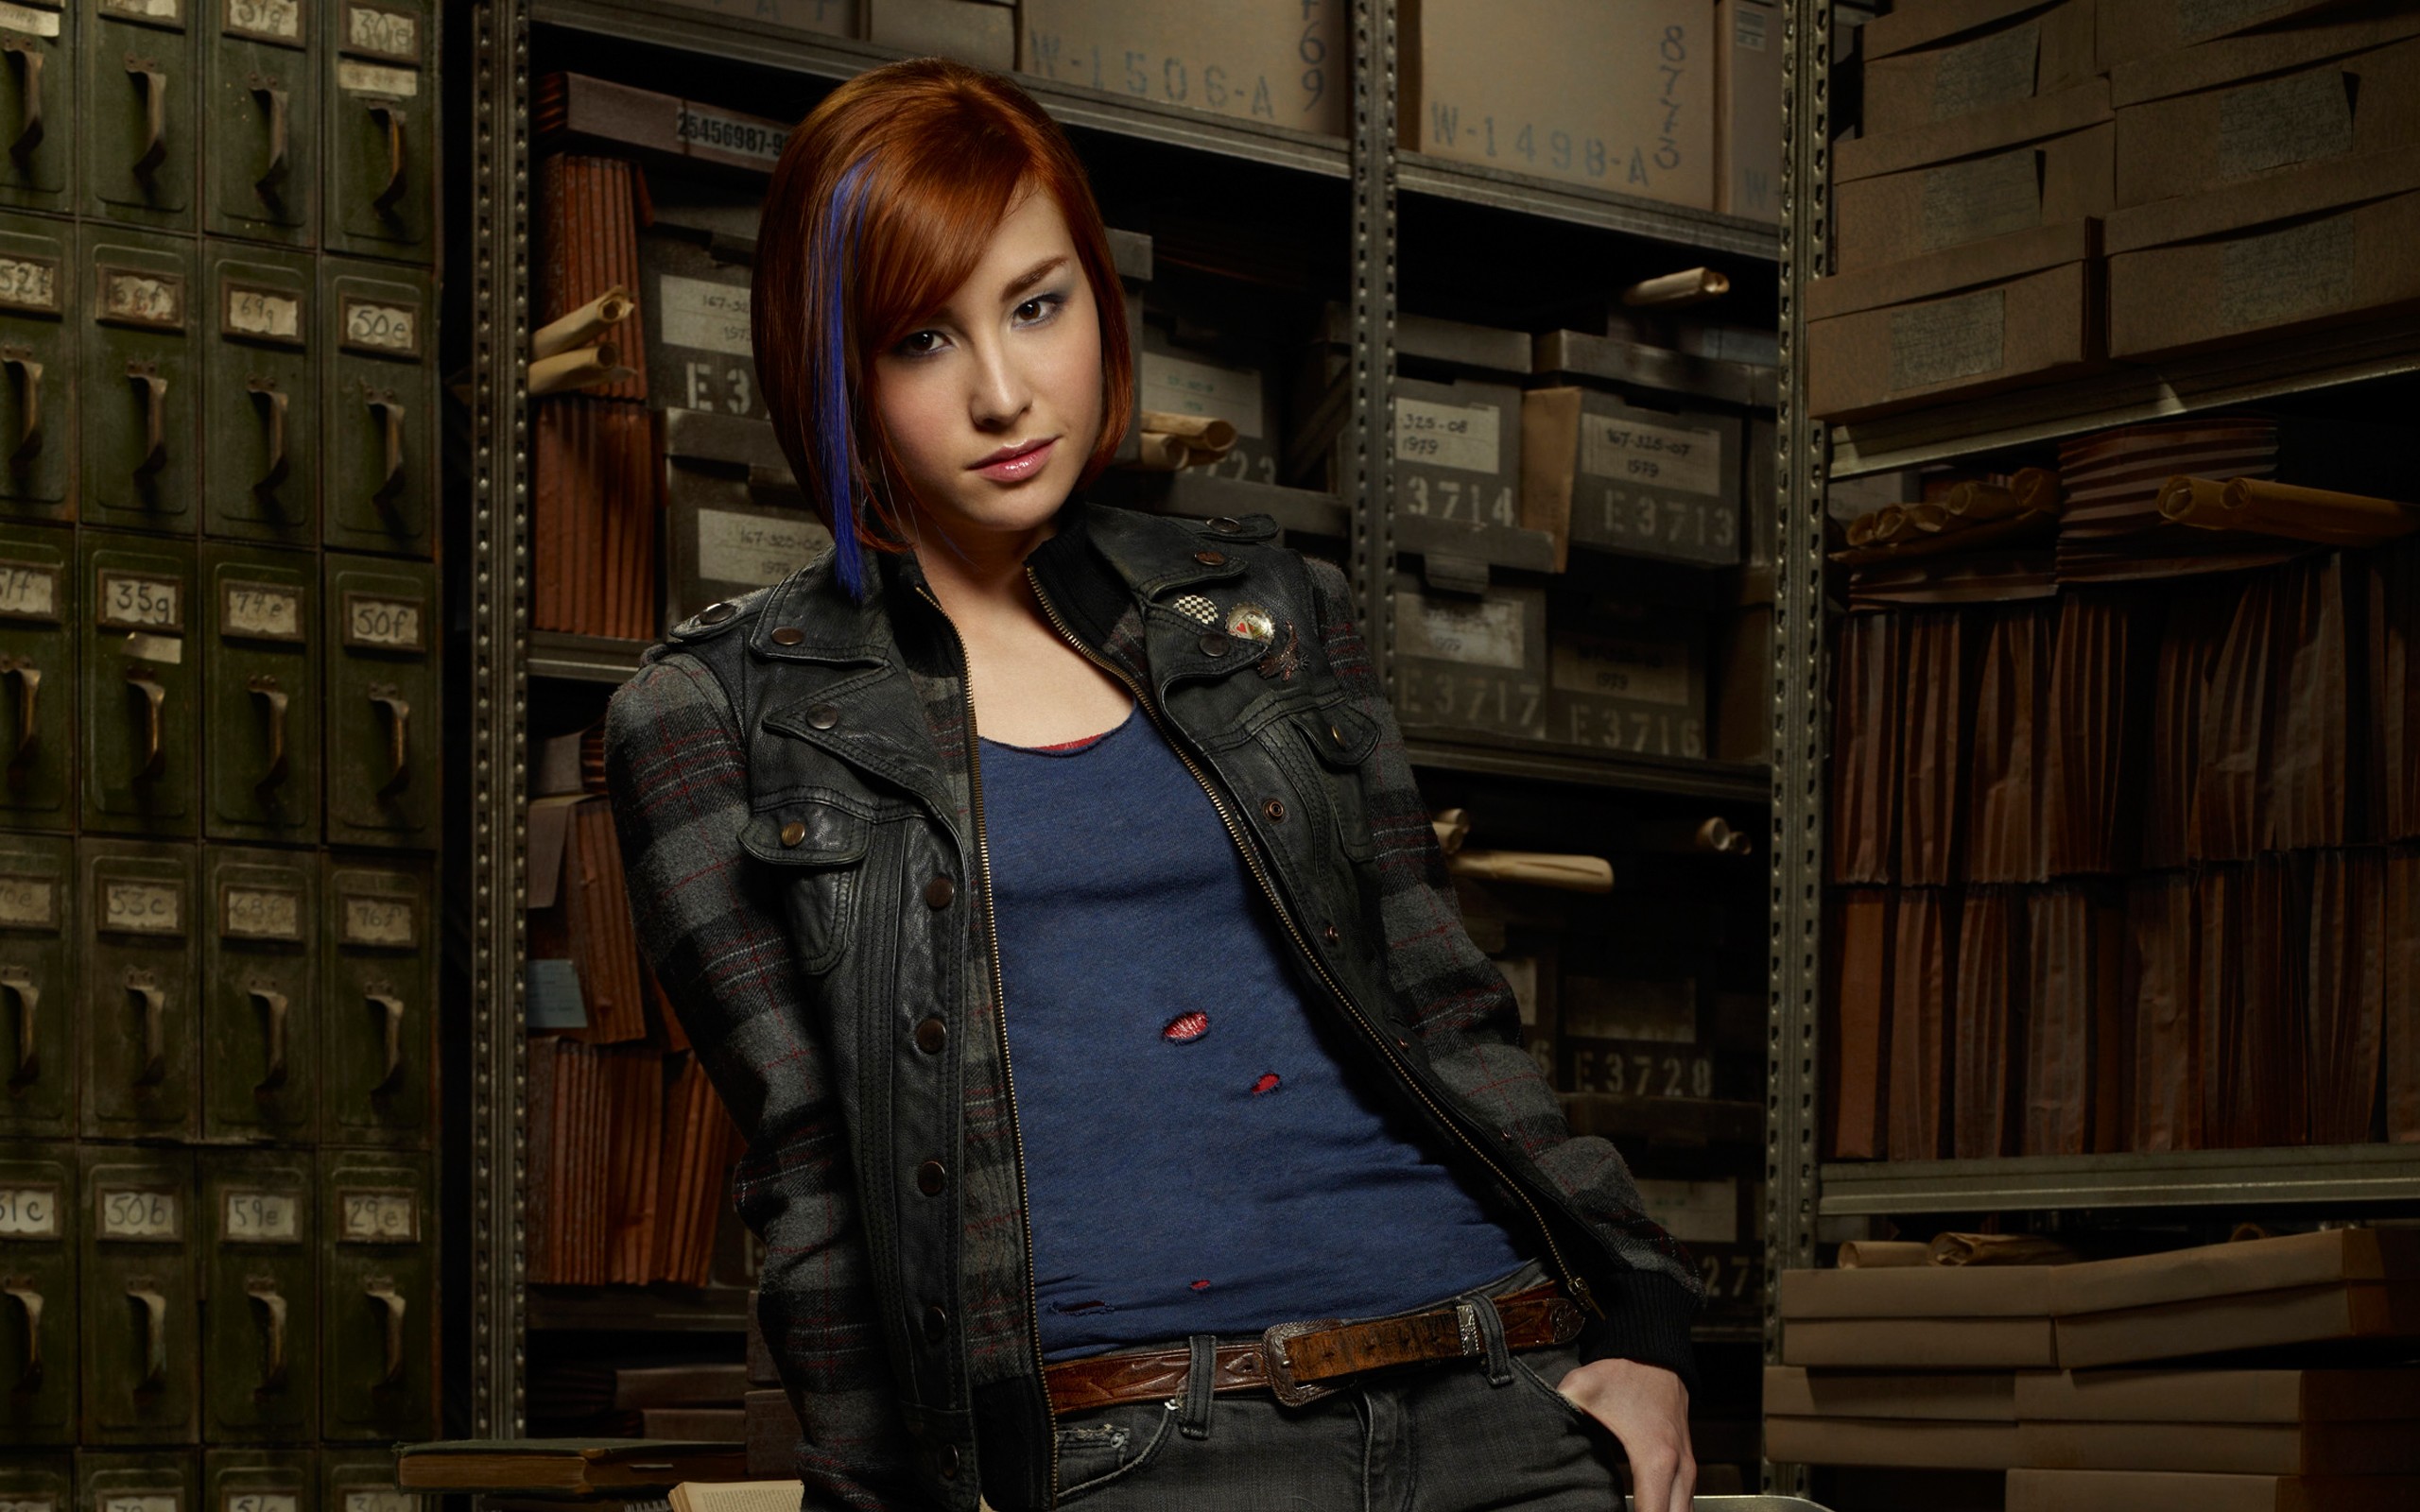 People 2560x1600 women redhead actress leather jacket blue tops shoulder length hair looking at viewer women indoors makeup TV series Warehouse 13 Allison Scagliotti